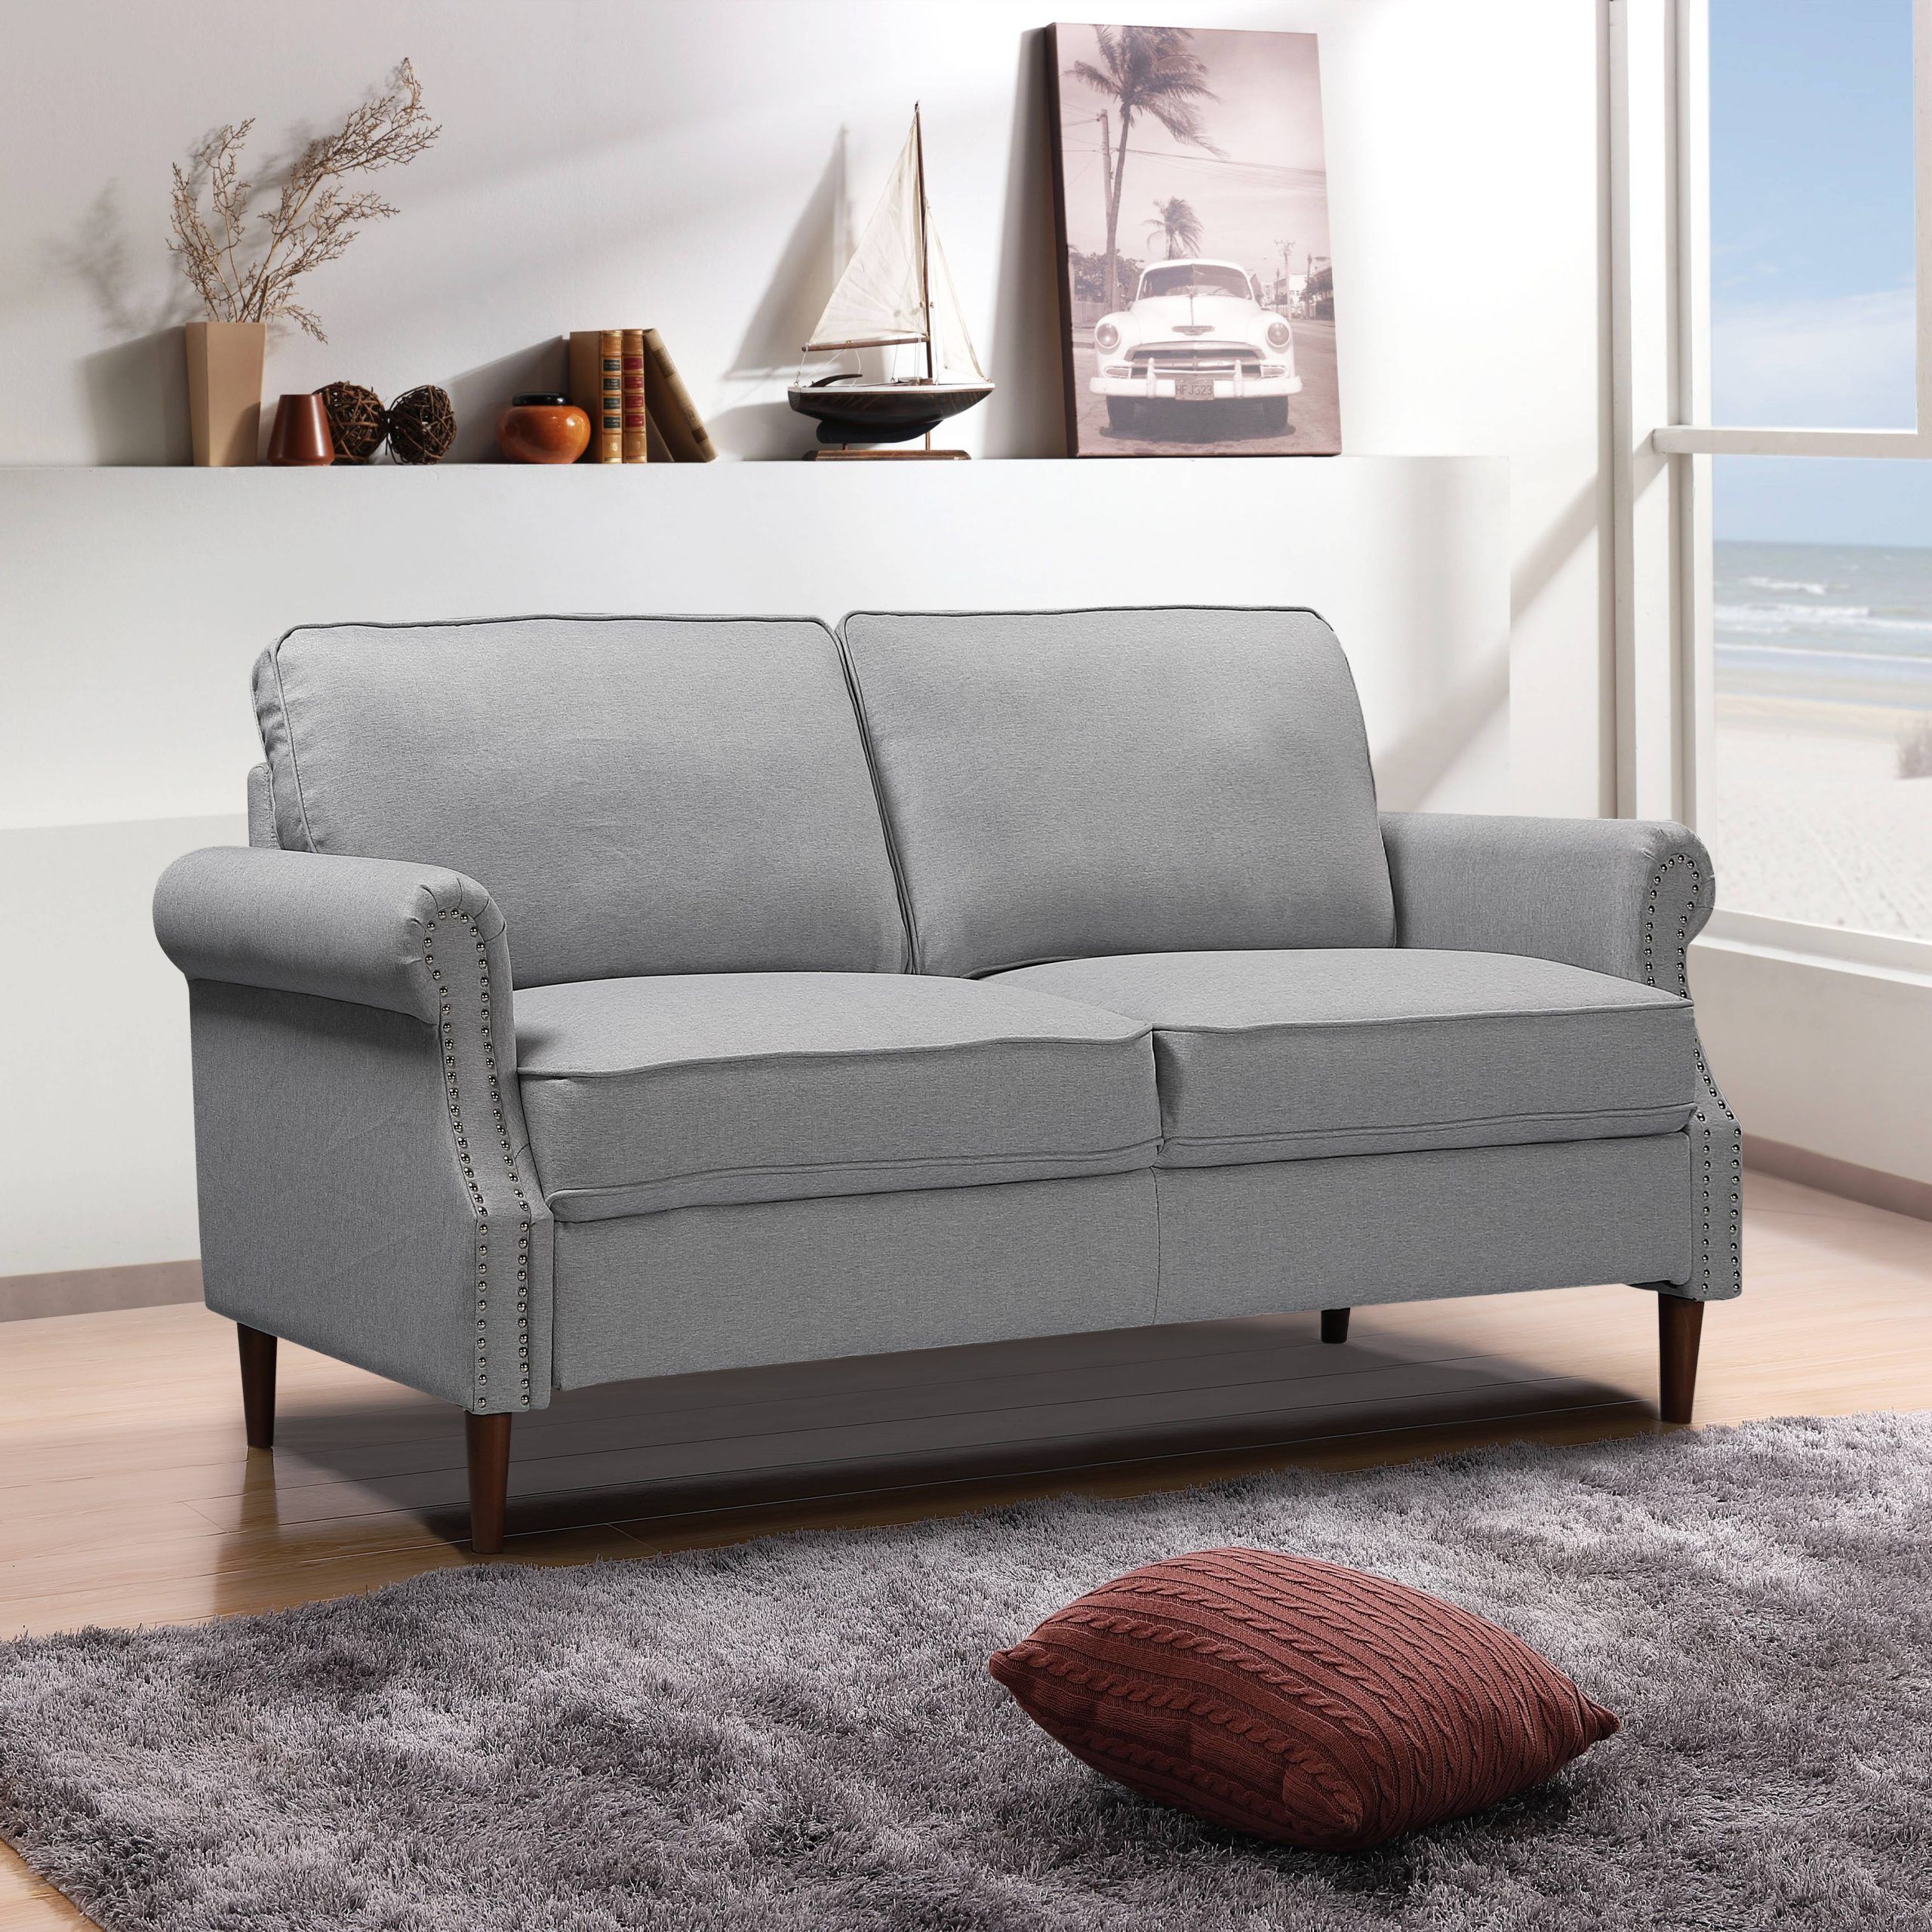 Gray Loveseat, Modern Linen Farbic Sofas For Small Spaces, Upholstered With Regard To Famous Modern Light Grey Loveseat Sofas (View 11 of 15)